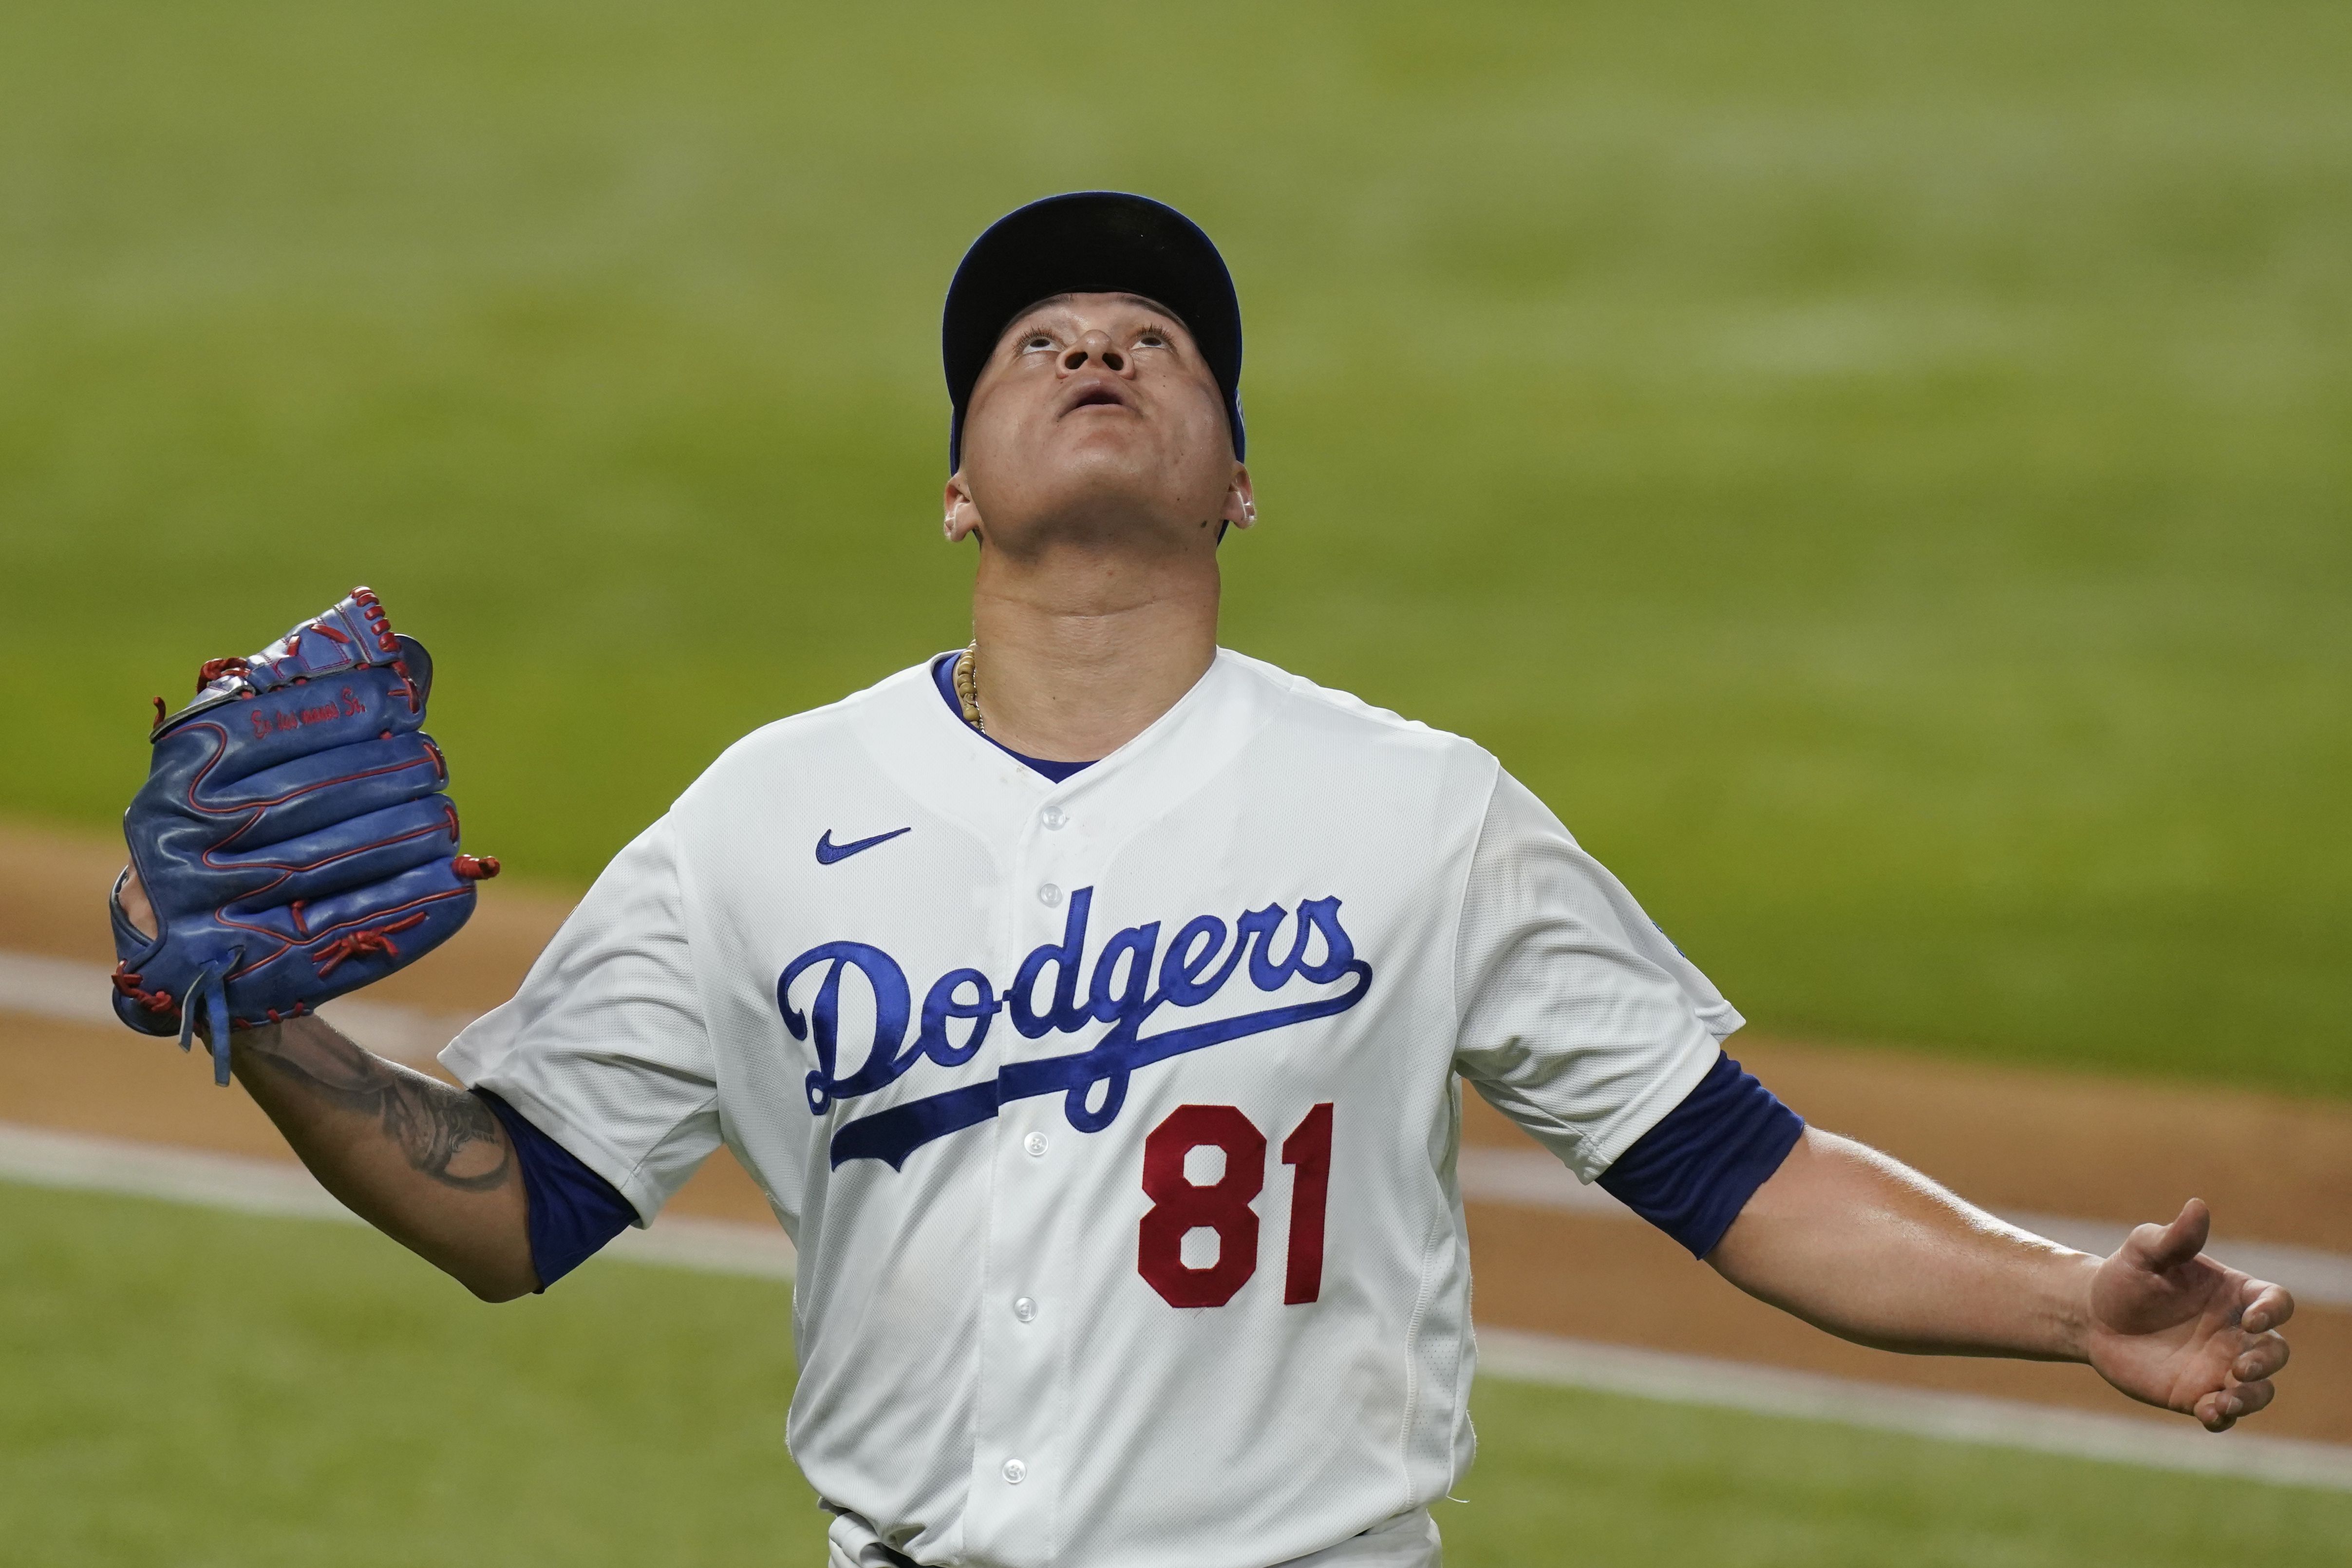 Parade of 7 pitchers not a merry-go-round for the Dodgers in the